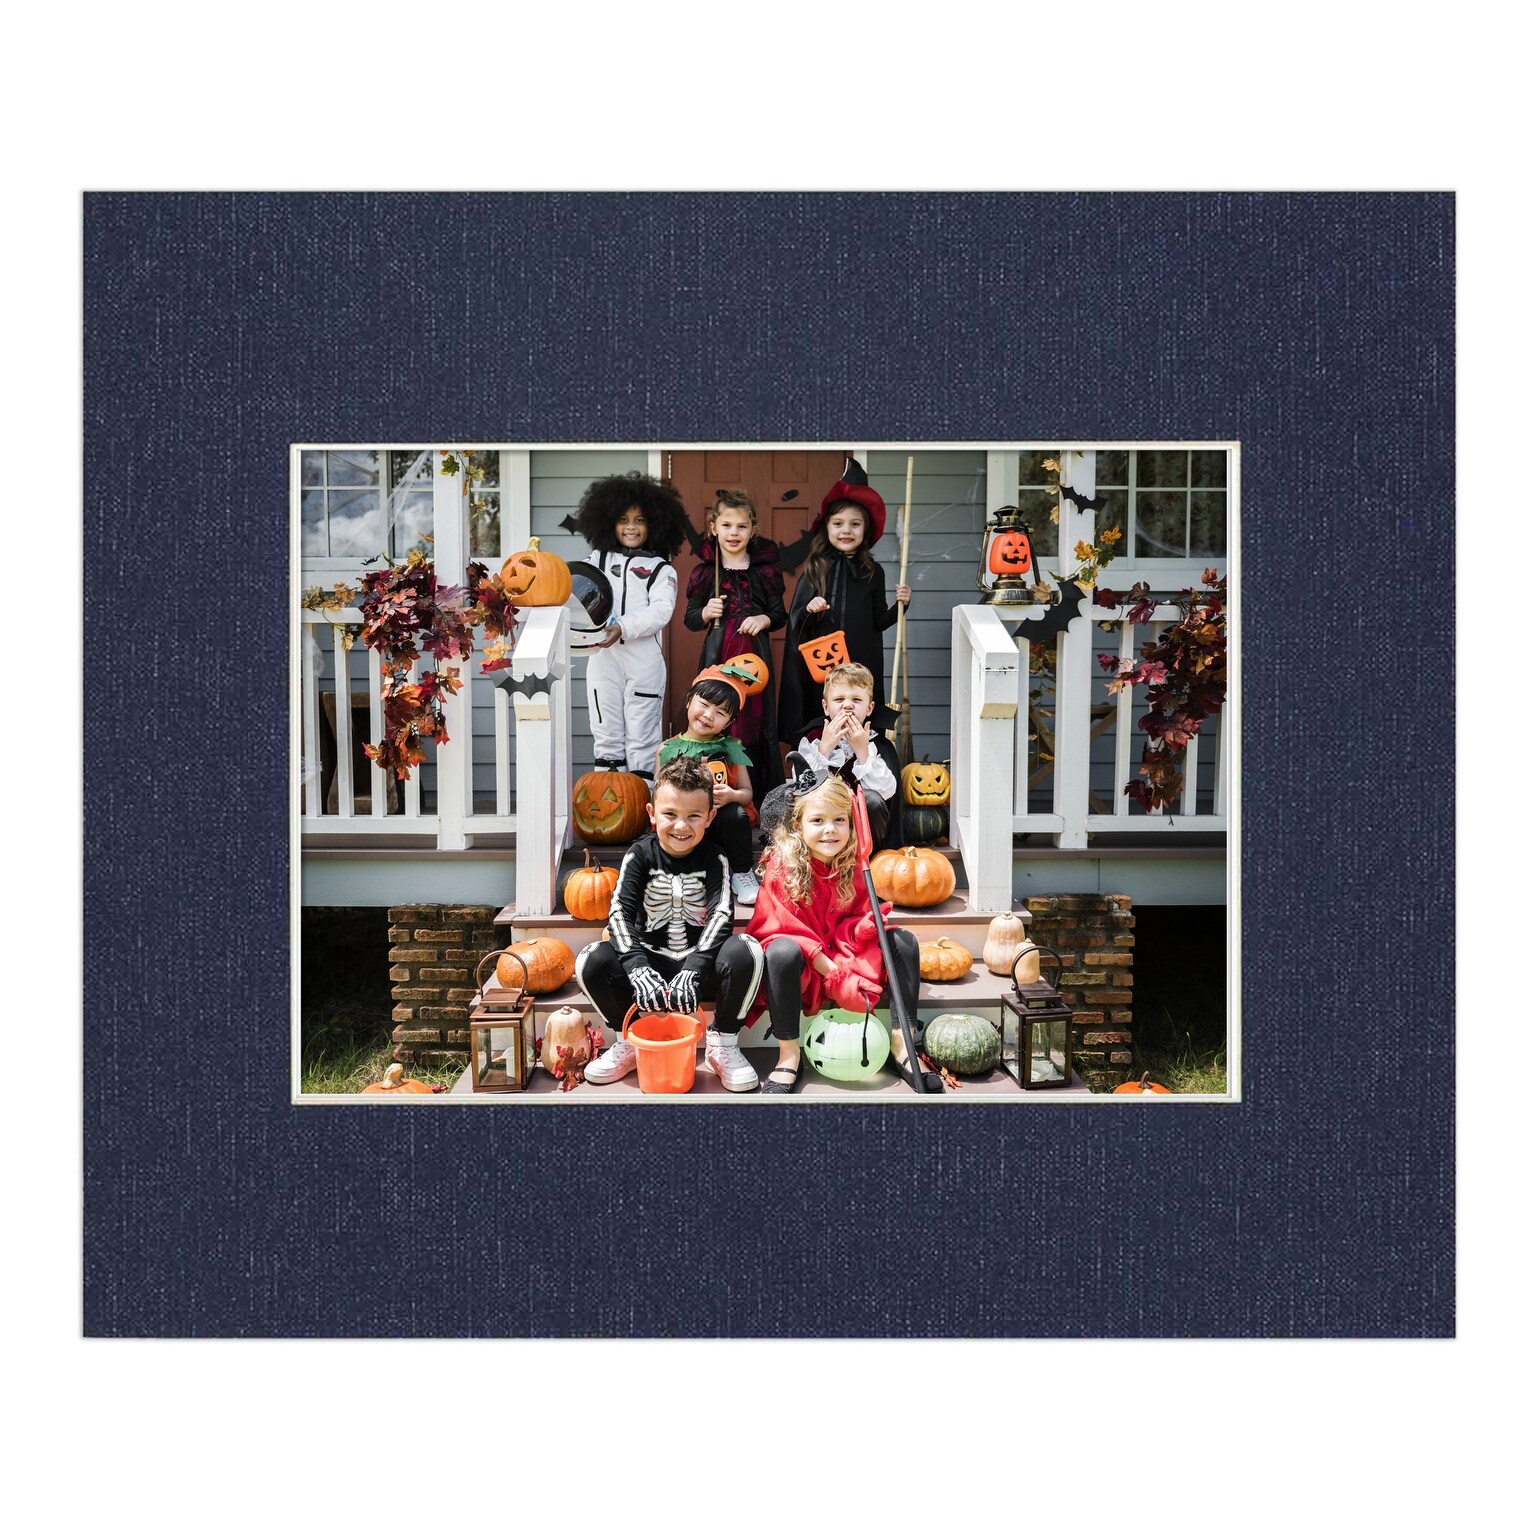  18x24 Mat for 12x18 Photo - Precut White on White Double Mat  Picture Matboard for Frames Measuring 18 x 24 Inches - Bevel Cut Matte to  Display Art Measuring 12 x